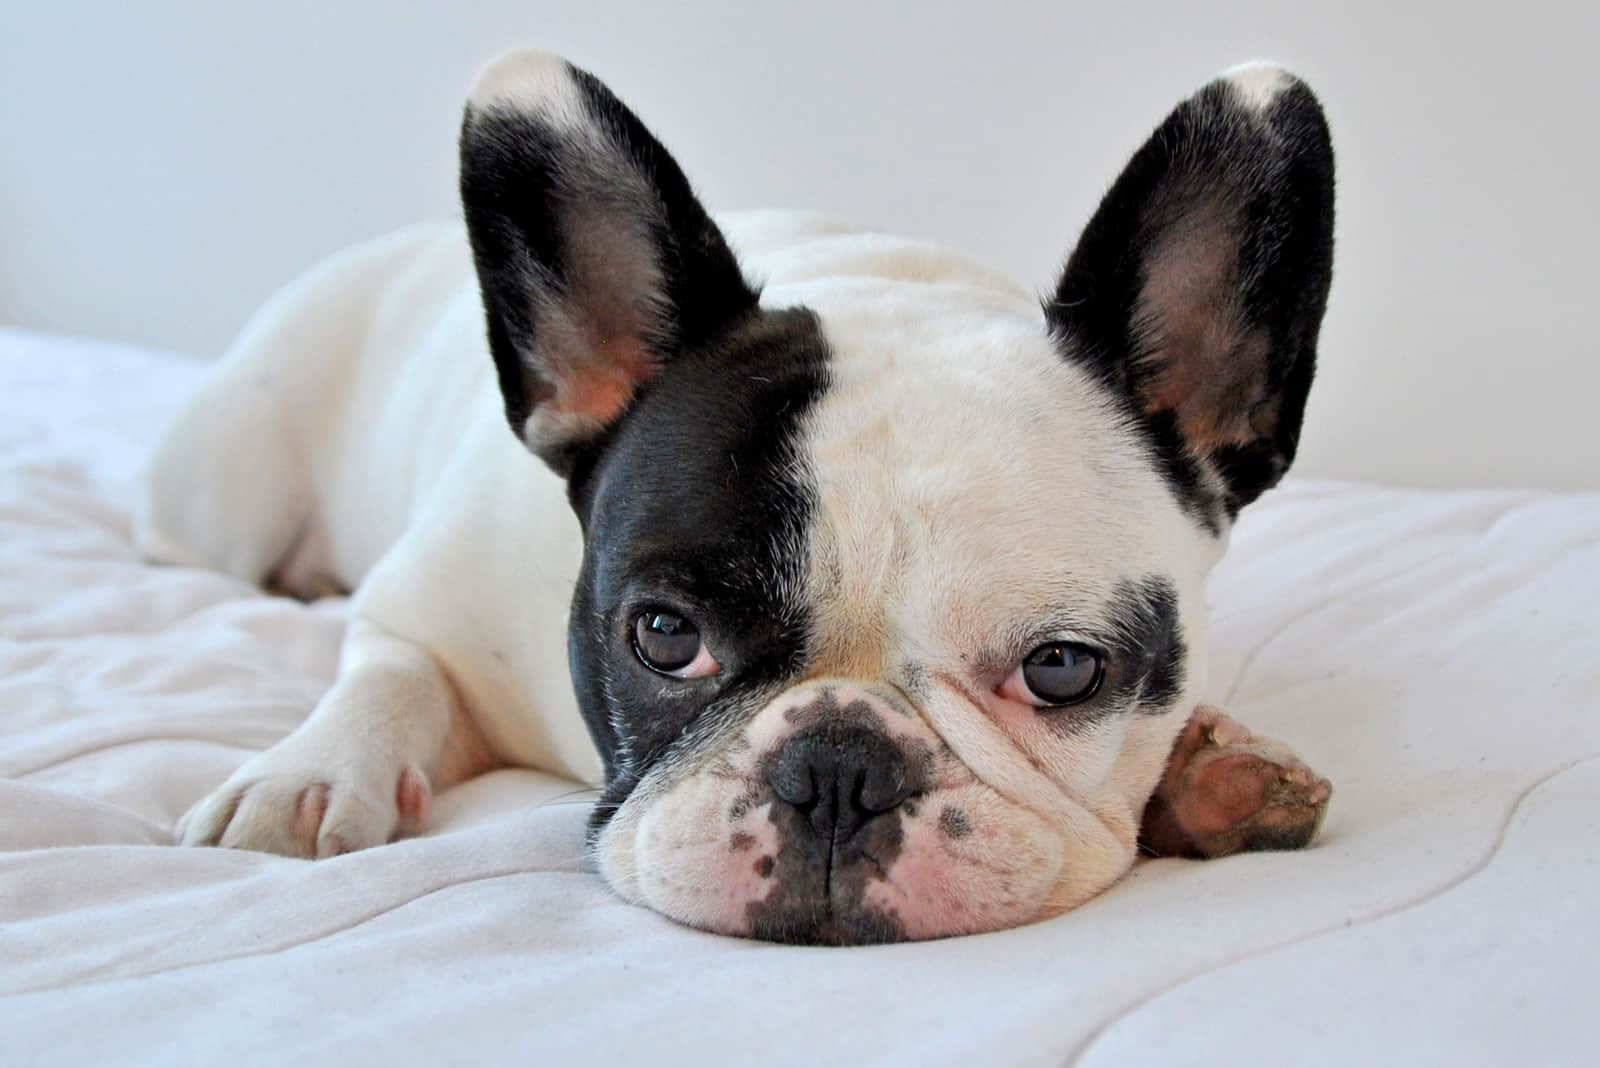 pied colored French Bulldog rests comfortably on a bed